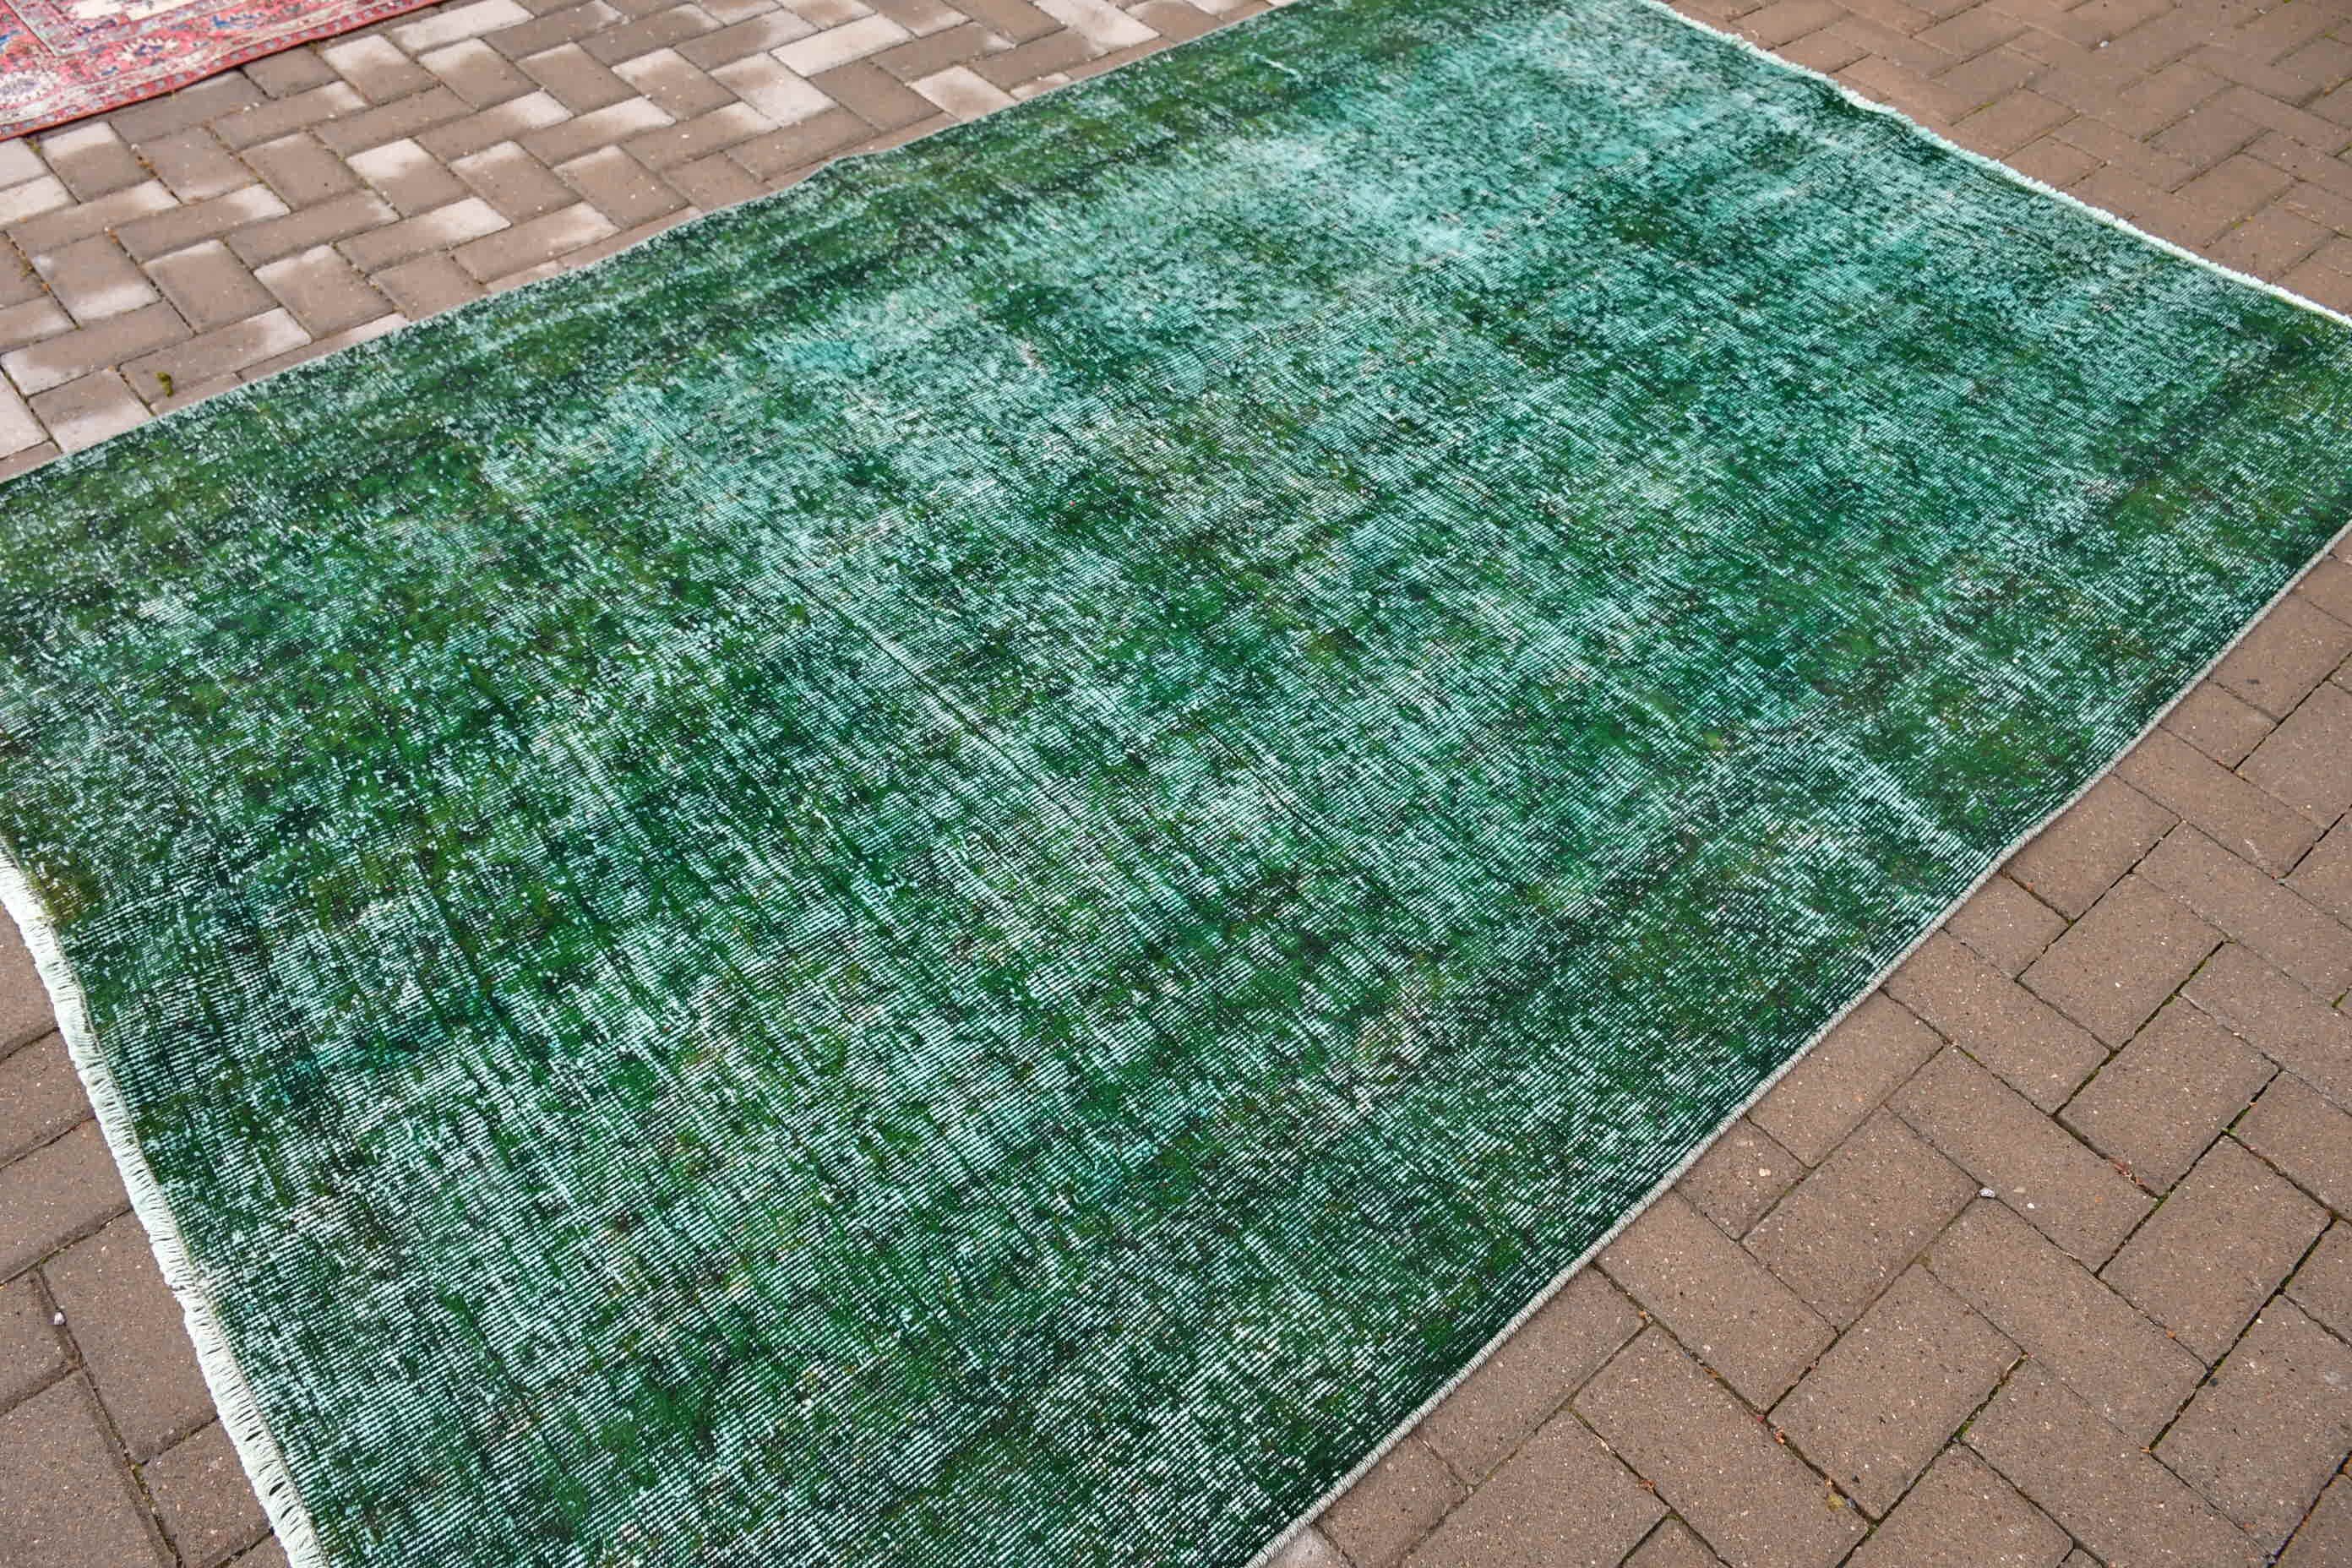 Cool Rugs, Rugs for Salon, Vintage Rug, Green  5.5x8.4 ft Large Rugs, Dining Room Rug, Turkish Rug, Salon Rugs